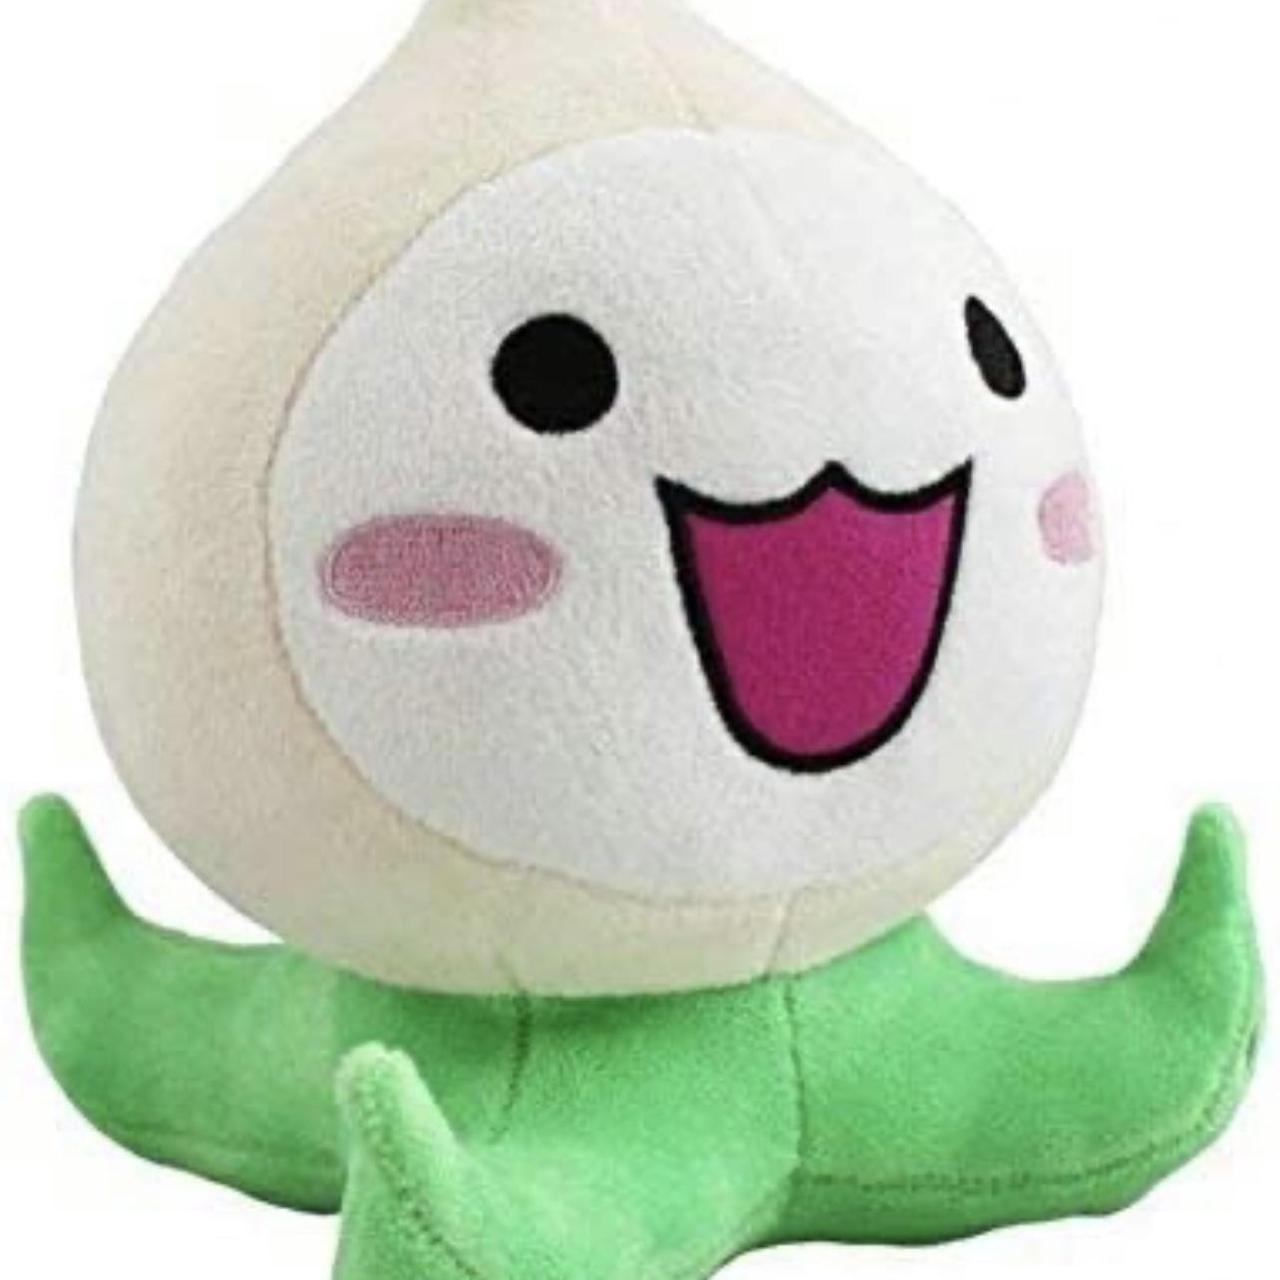 Product Image 2 - Overwatch Pachimari Plush
Good condition, about